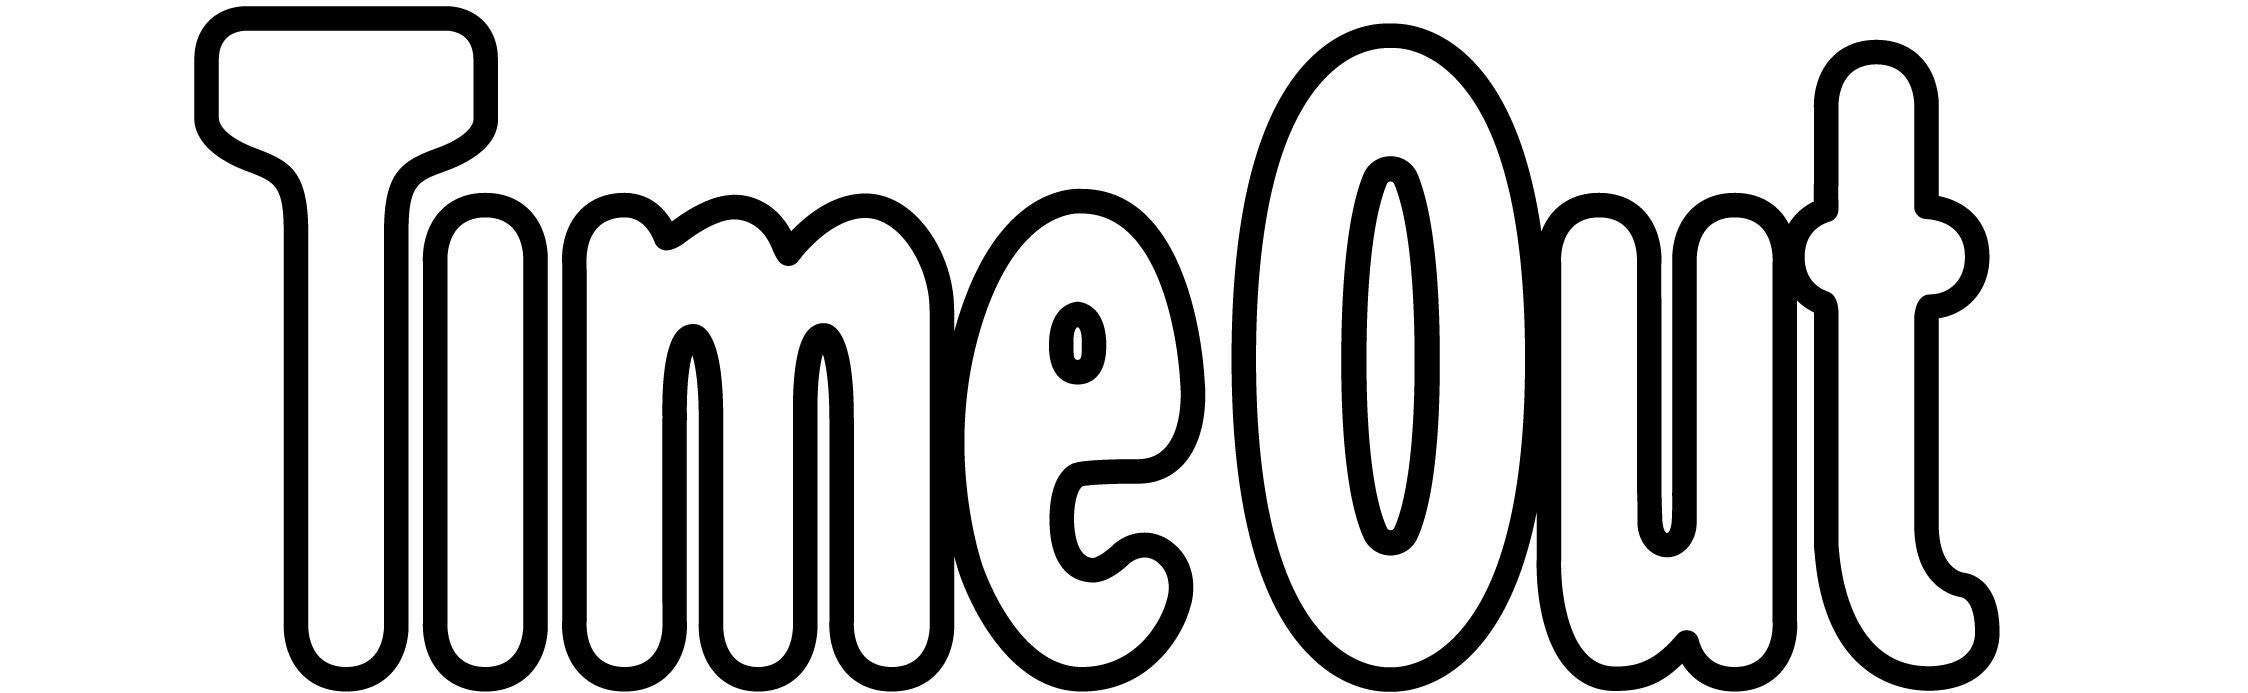 time-out-logo-png-1-transparent.png